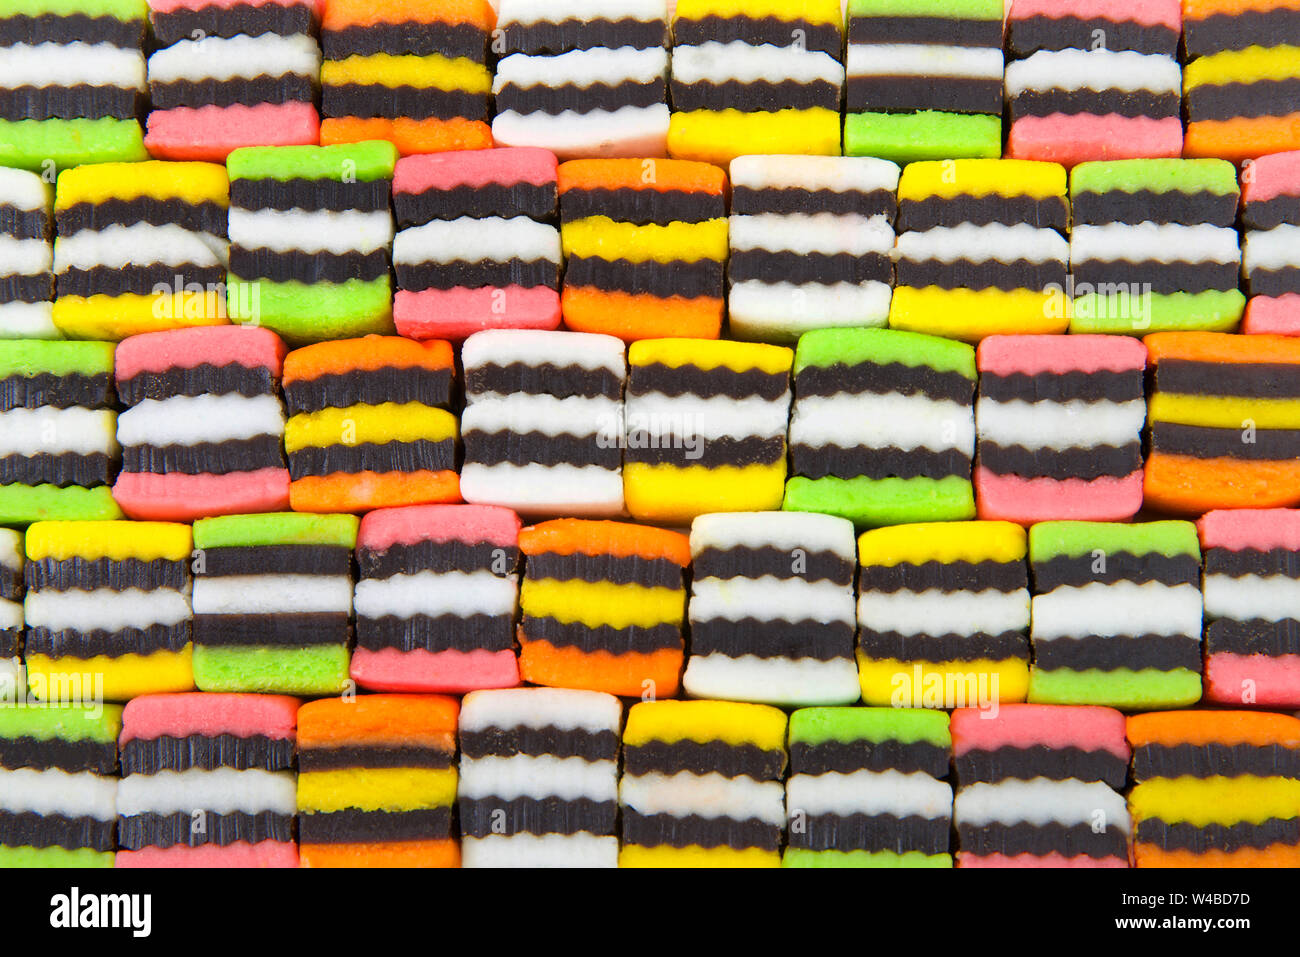 Background of bright colorful licorice candy squares alternating colors. Stock Photo